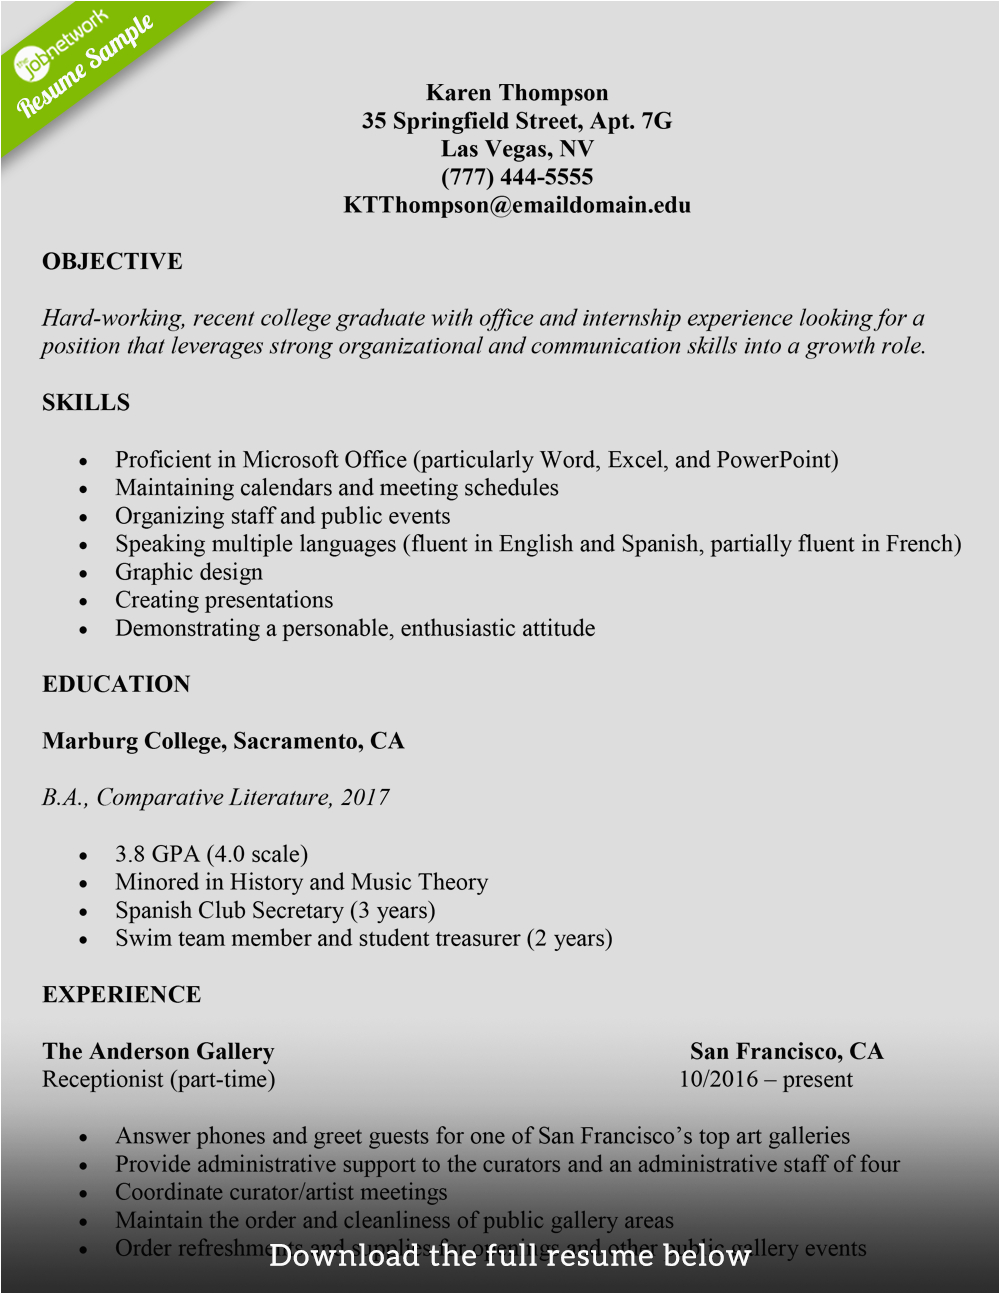 Sample Resume to Get Into College Resume for Getting Into College College Admission Resume Cv Samples